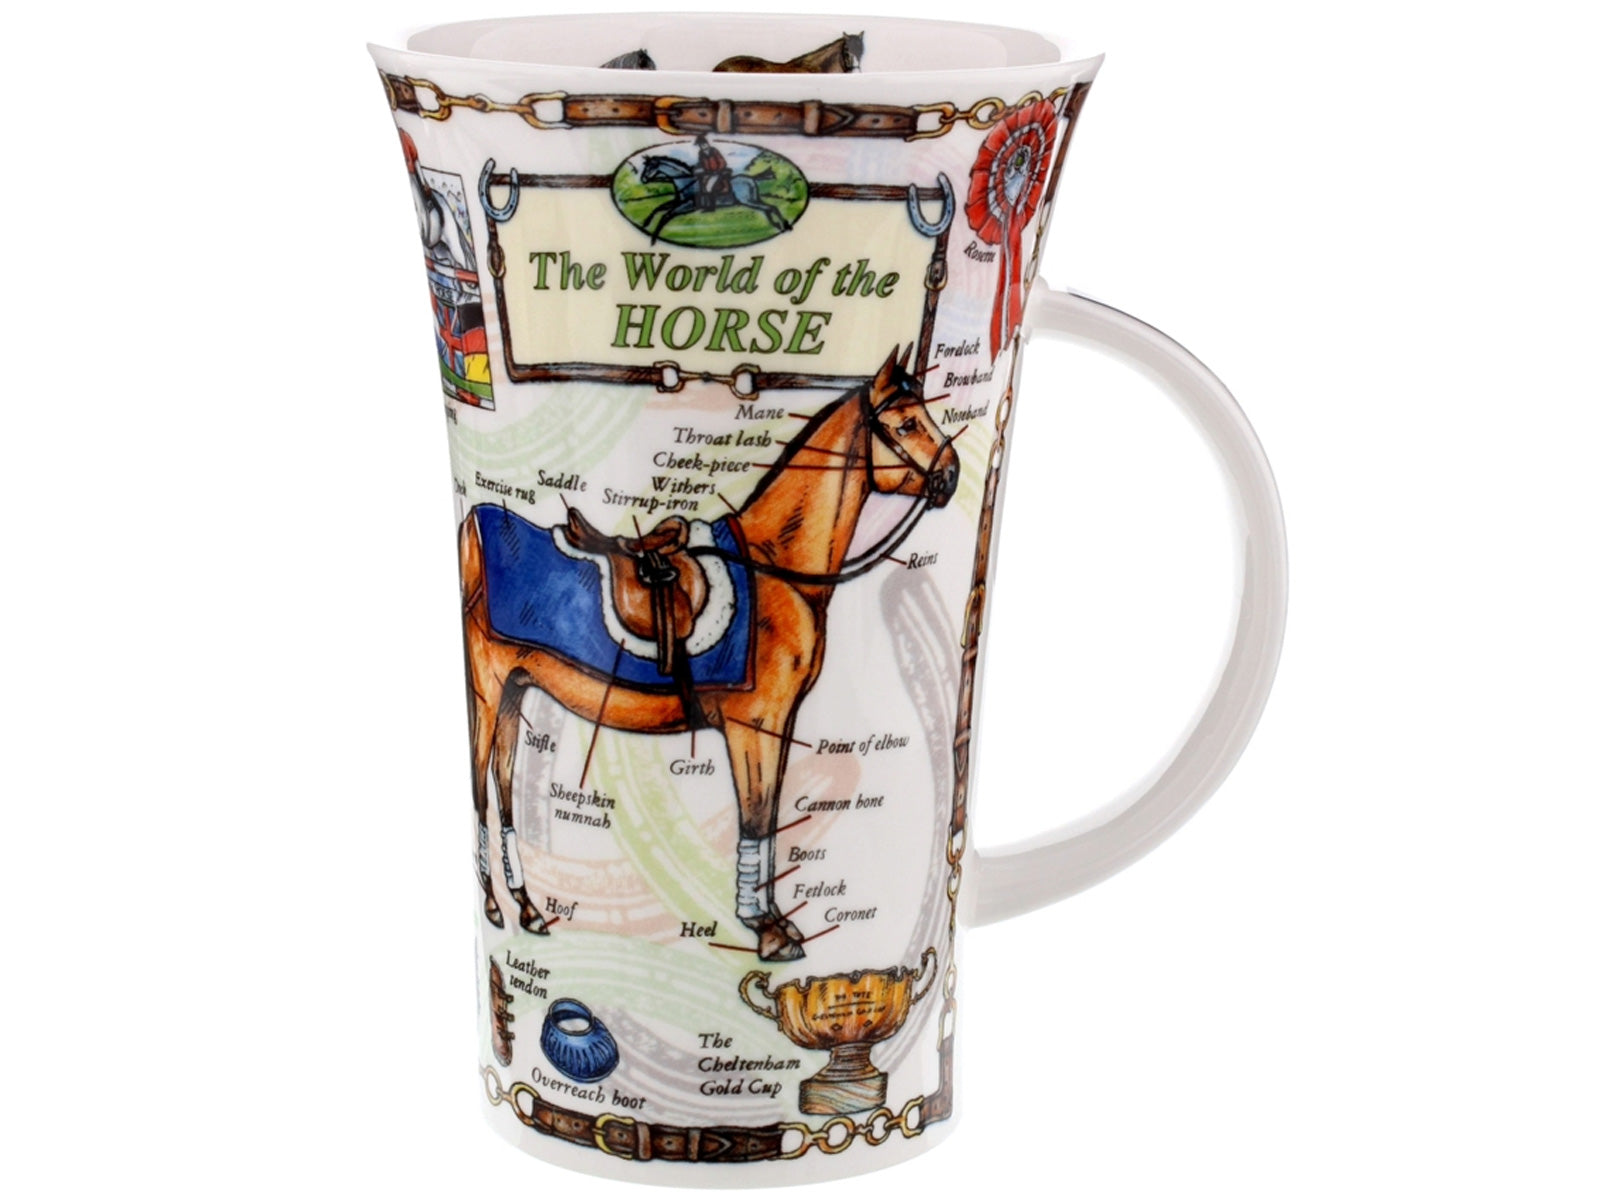 Dunoon Glencoe The World Of The Horse Mug is a large fine bone china mug that depicts a fully-labelled diagram of a horse on its exterior, alongside pictures of the equipment needed for horse riding and snapshots of all the different sporting events horses take part in. As well as this, there are different breeds of horse printed around the inner rim of the mug.